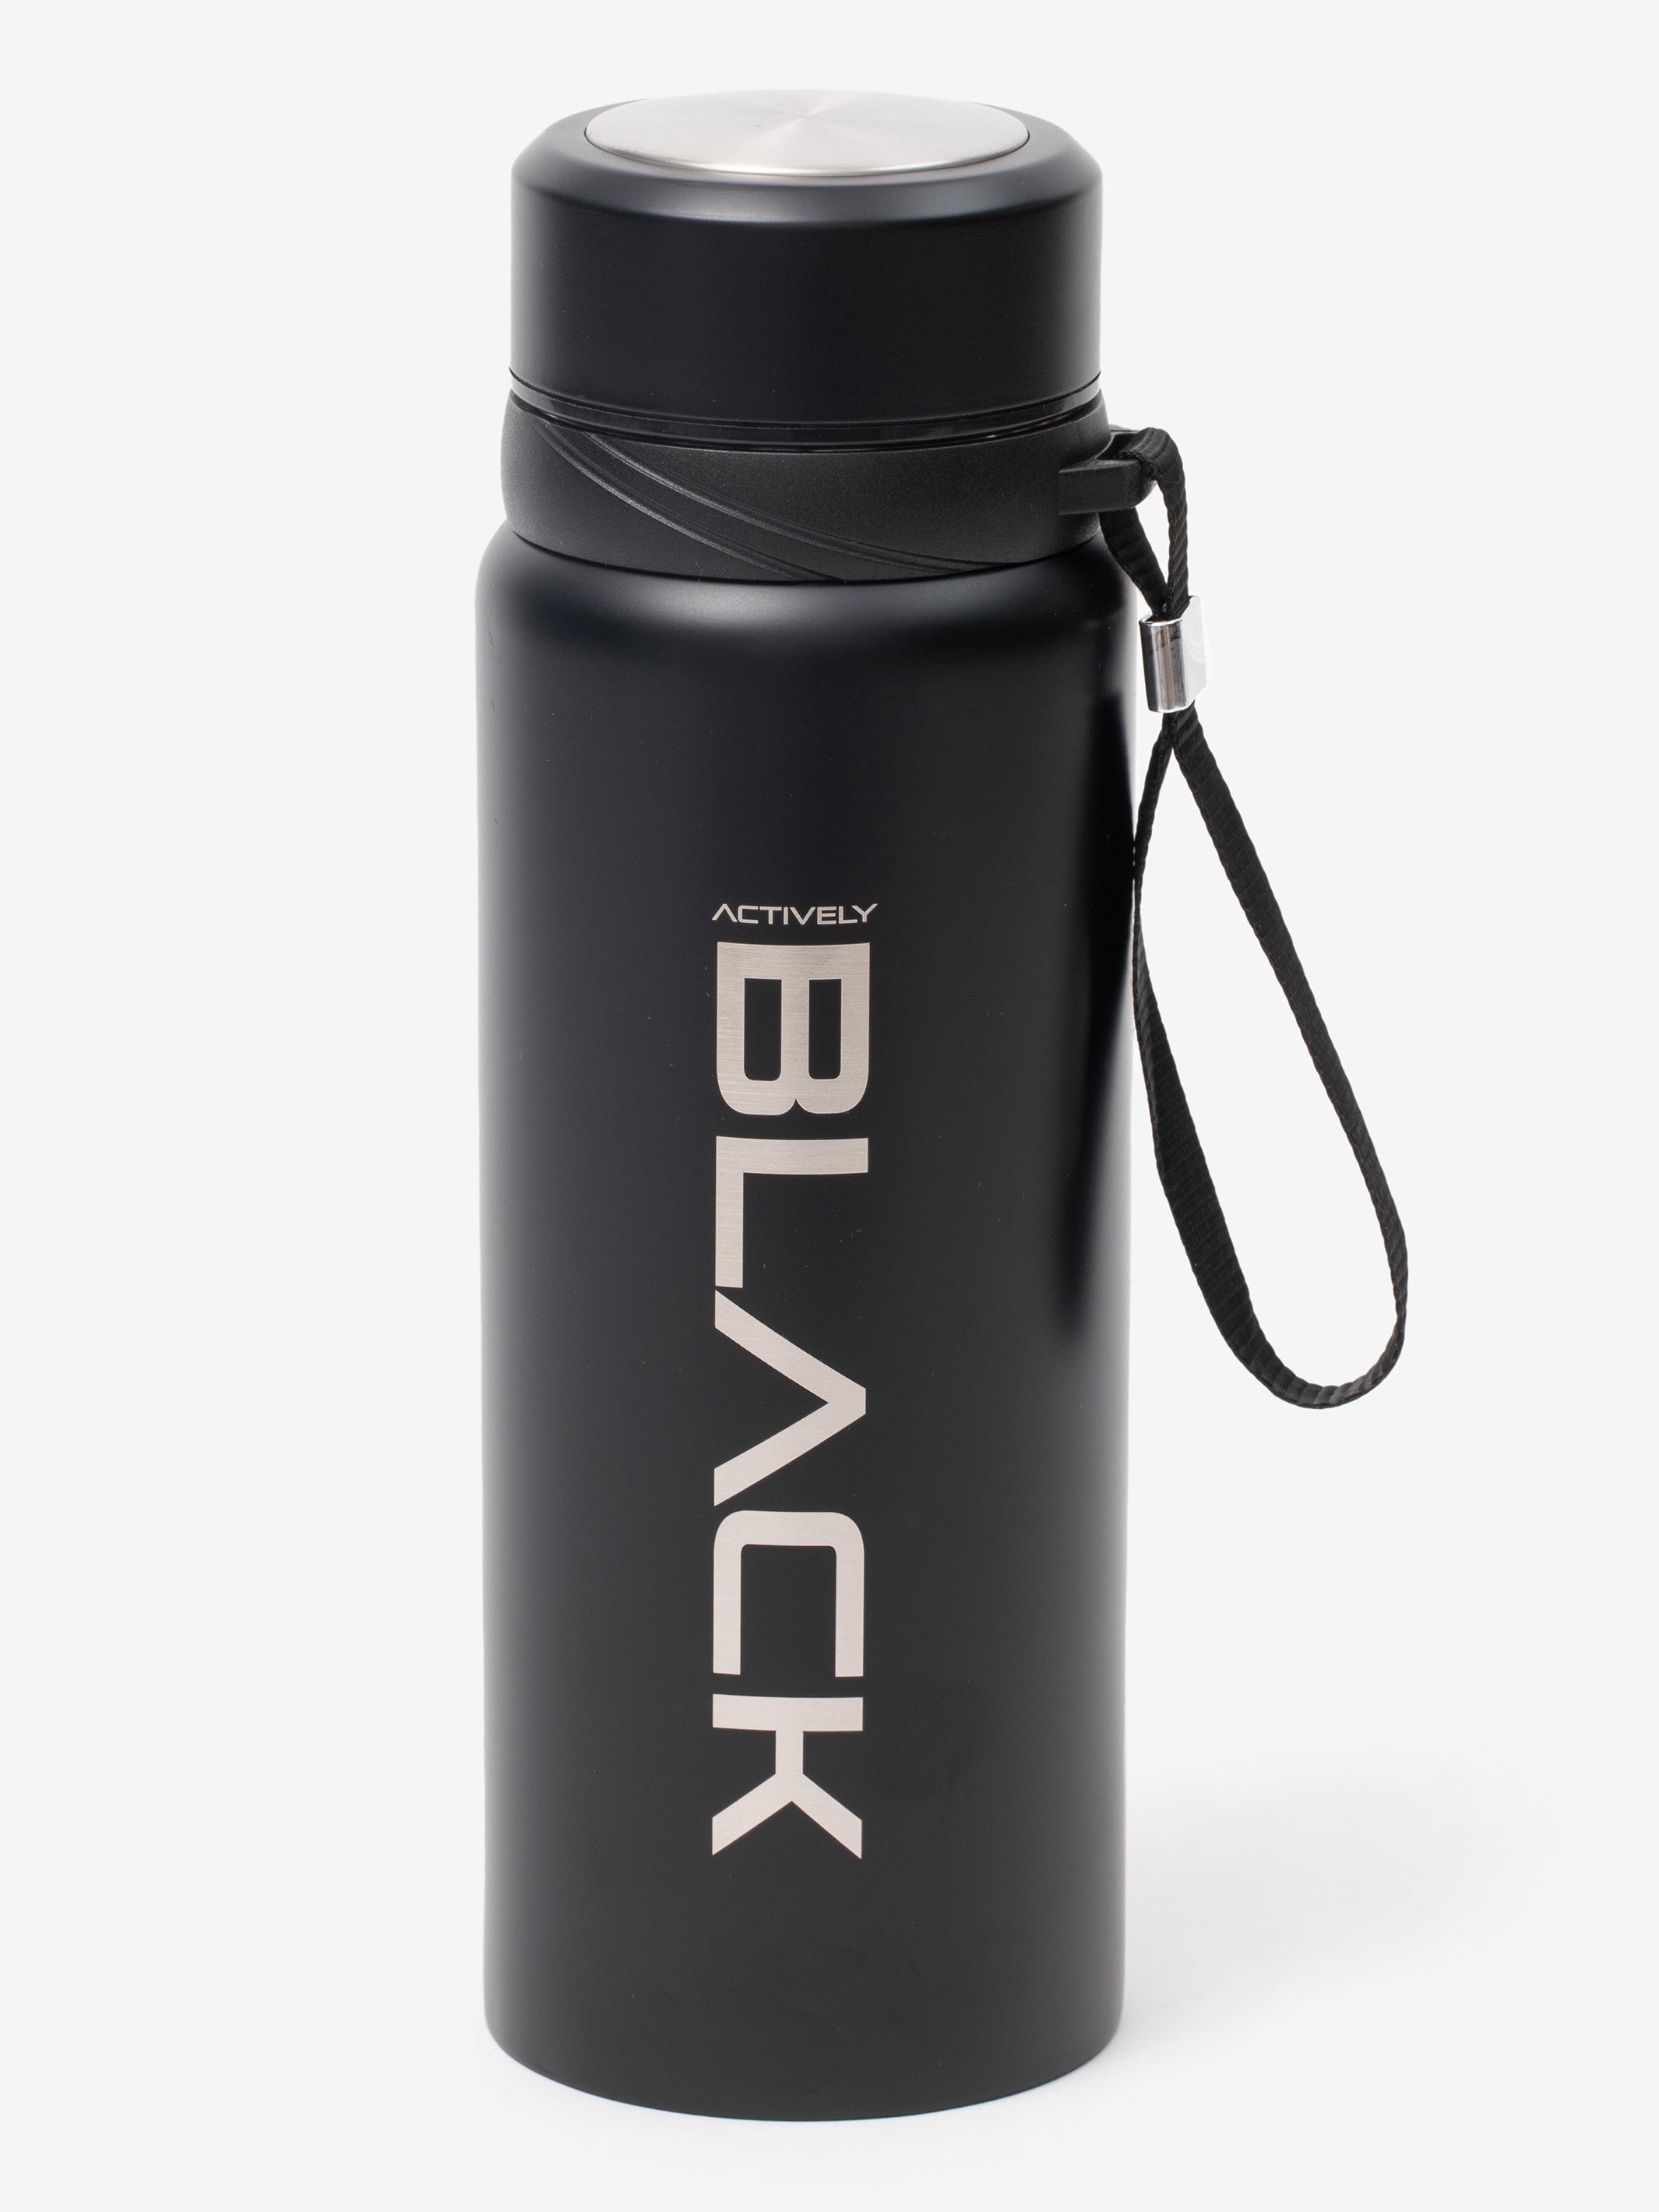 Actively Black Stainless Steel Sports Bottle 2.0